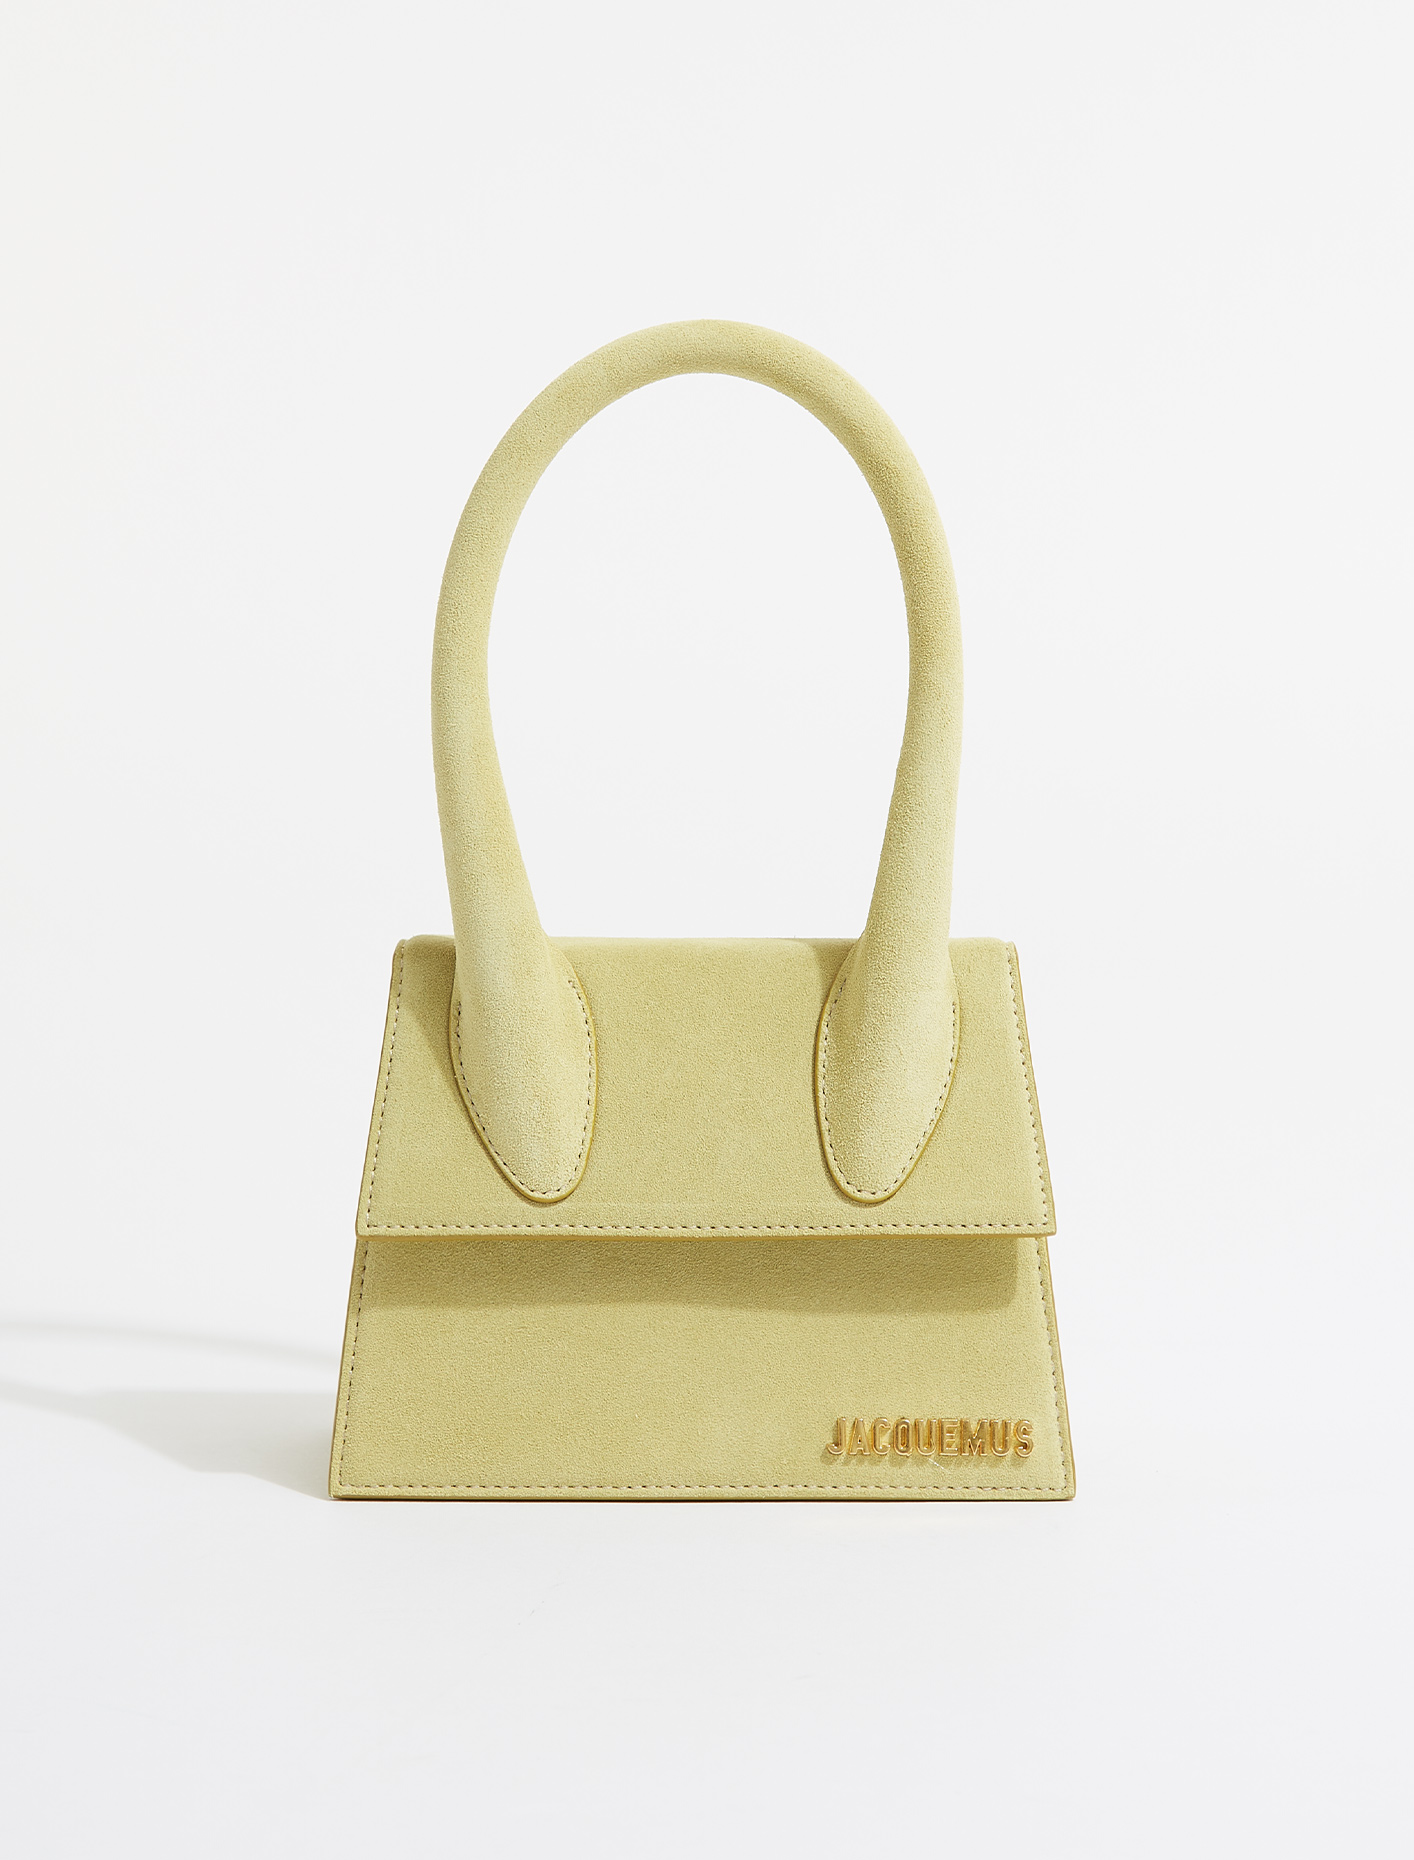 Jacquemus Le Chiquito Moyen in Light Green | Voo Store Berlin ...